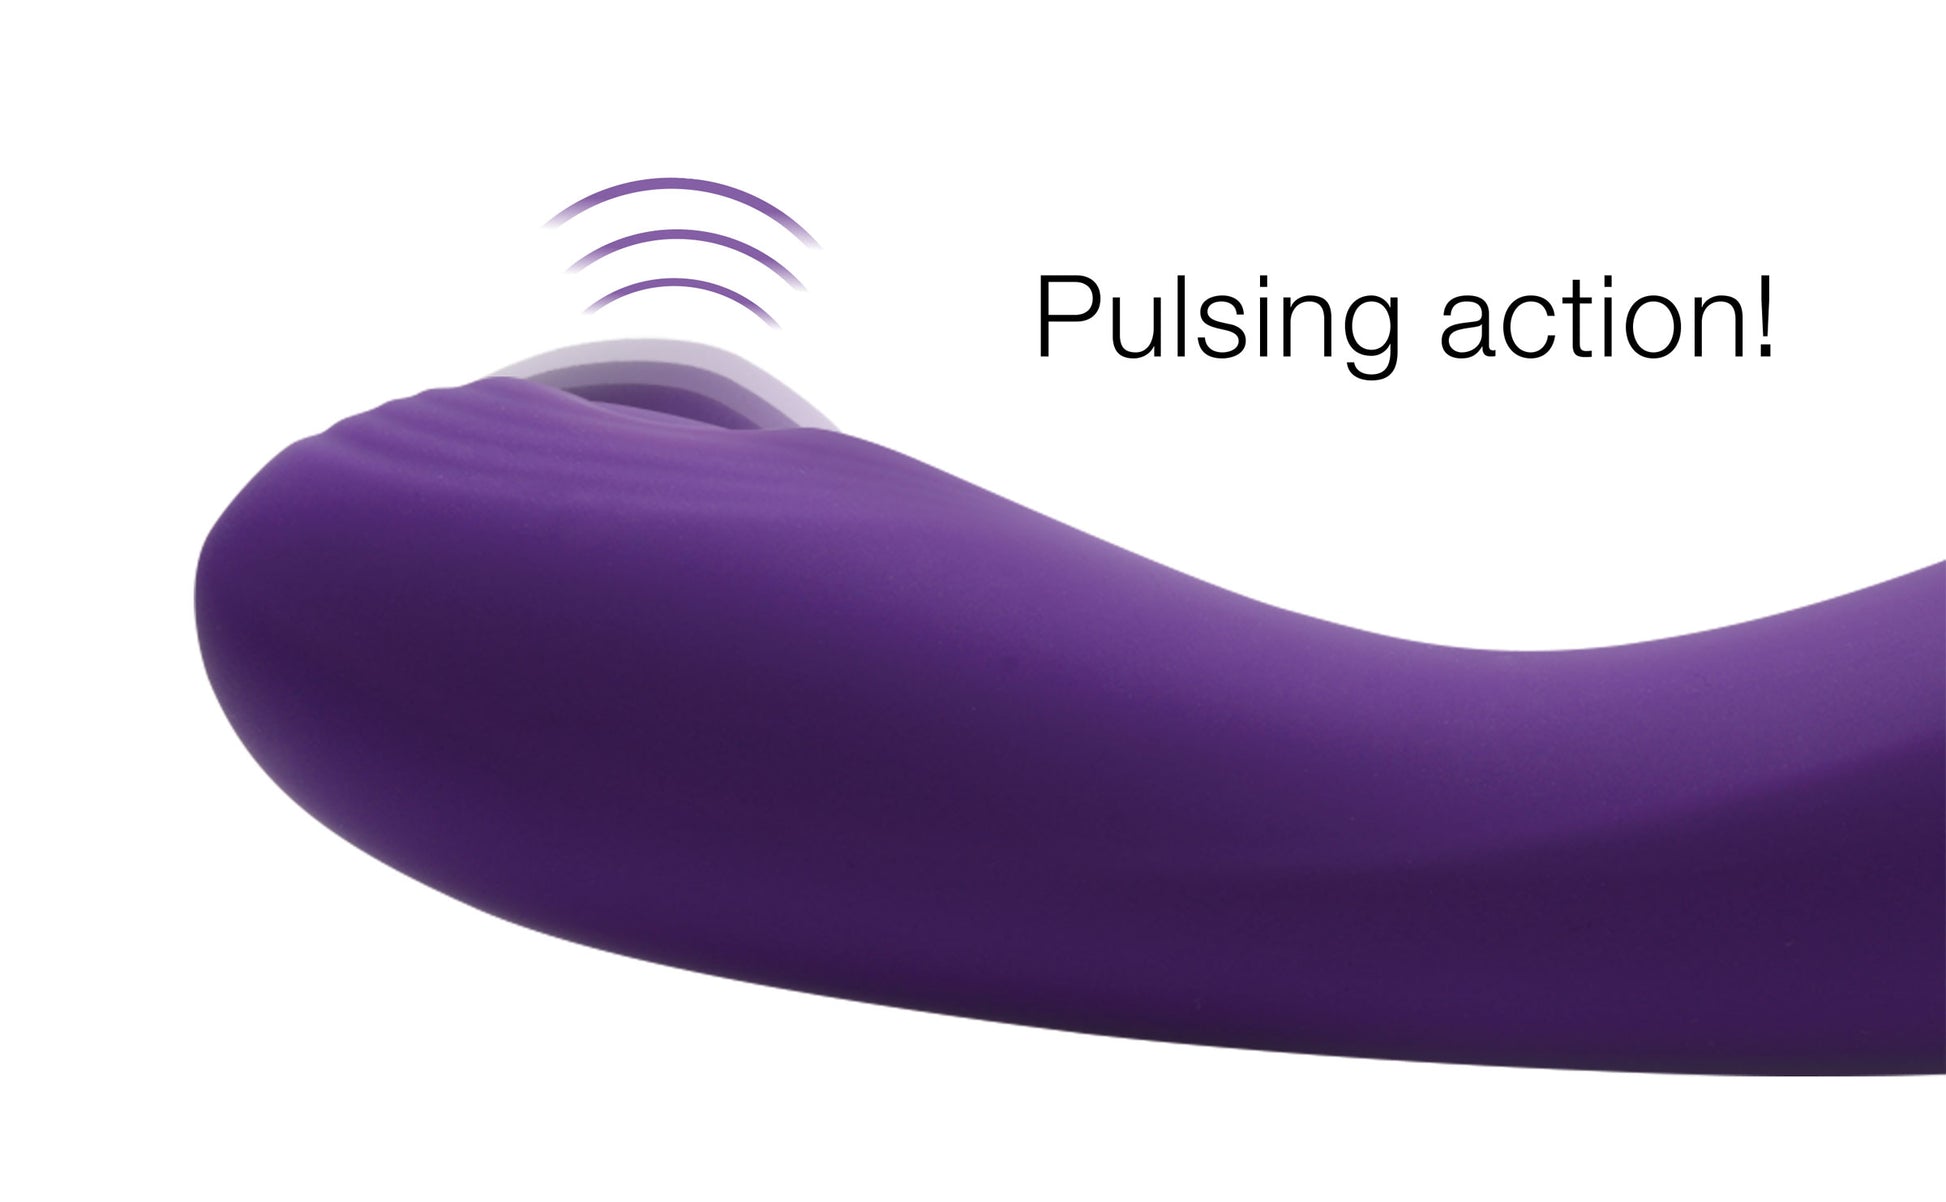 Pulsing G-spot Pinpoint Silicone Vibrator with Attachments - UABDSM